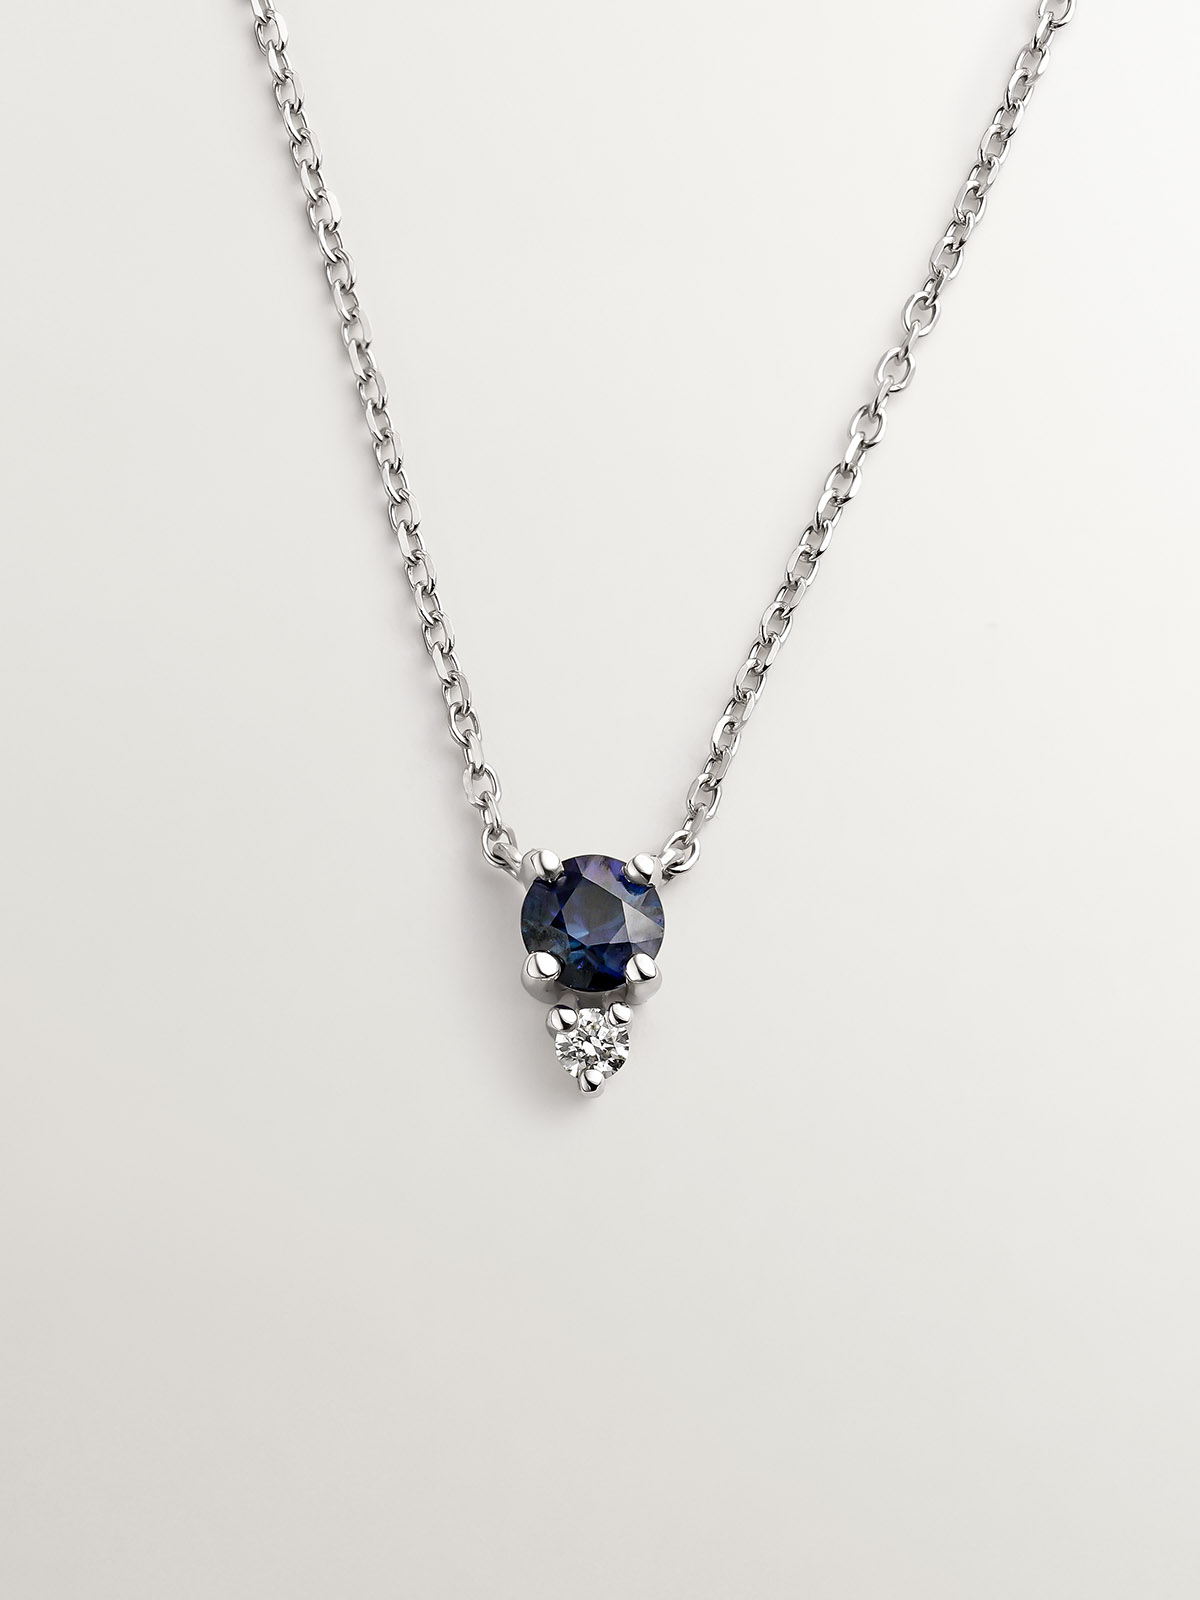 18K white gold pendant with sapphire and diamond.